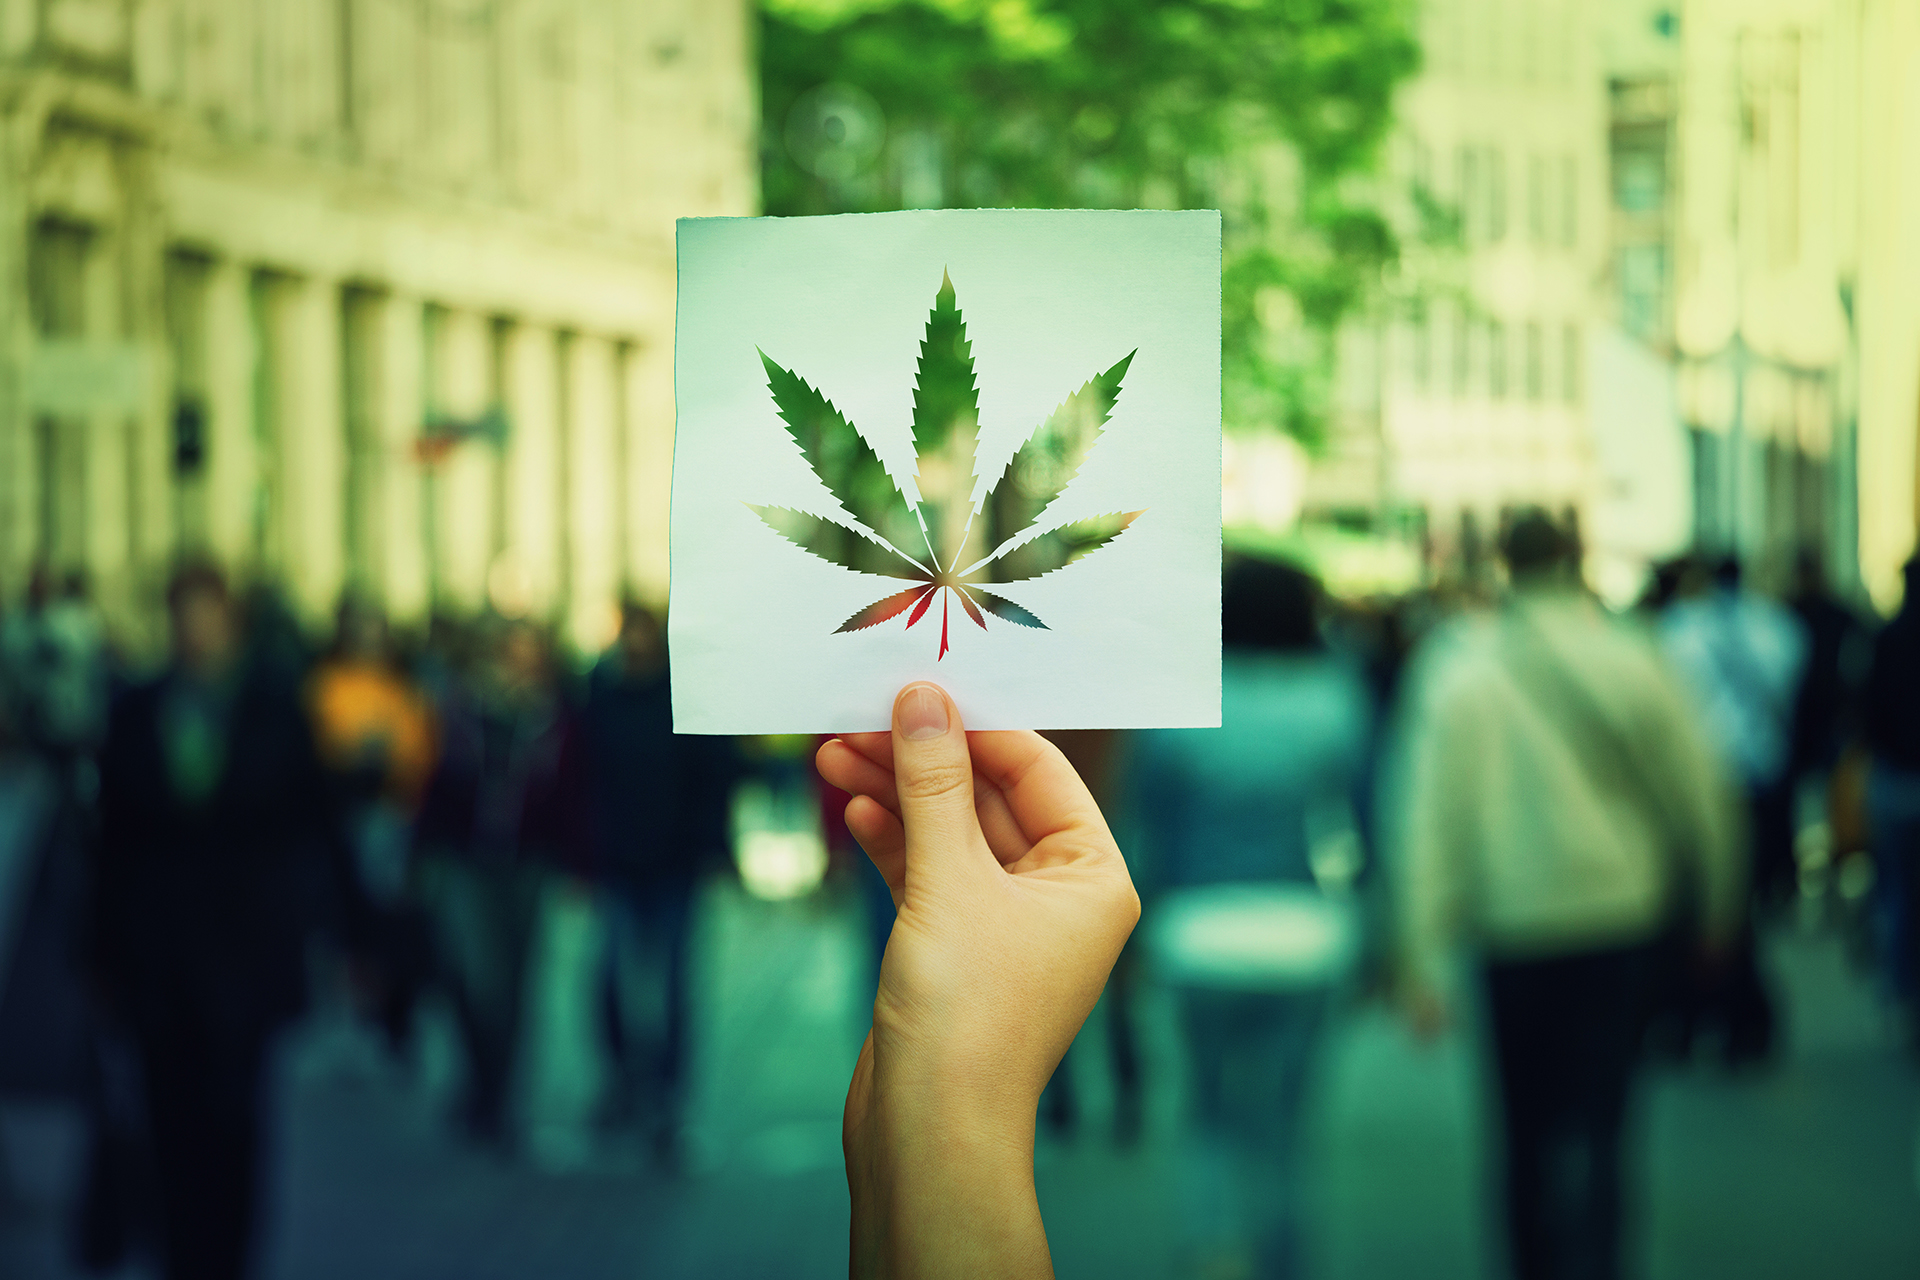 A hand holding up a cut-out of a marijuana leaf with building and other people walking in the background.